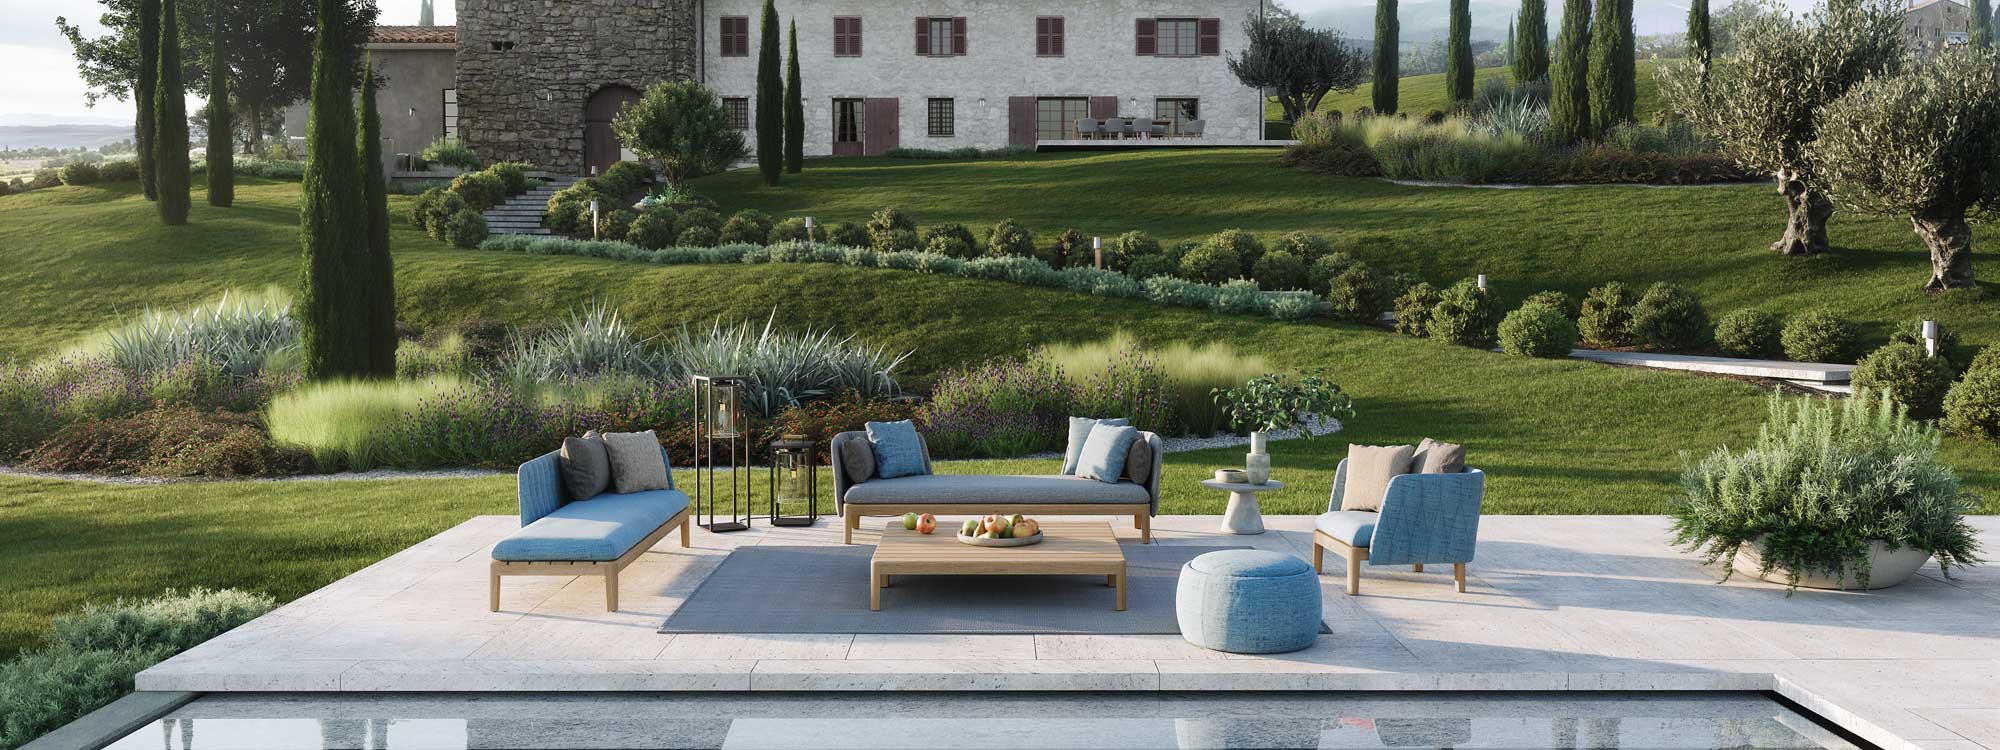 Image of Royal Botania Calypso sofas and lounge chairs in teak and blue upholstery on Tuscan terrace